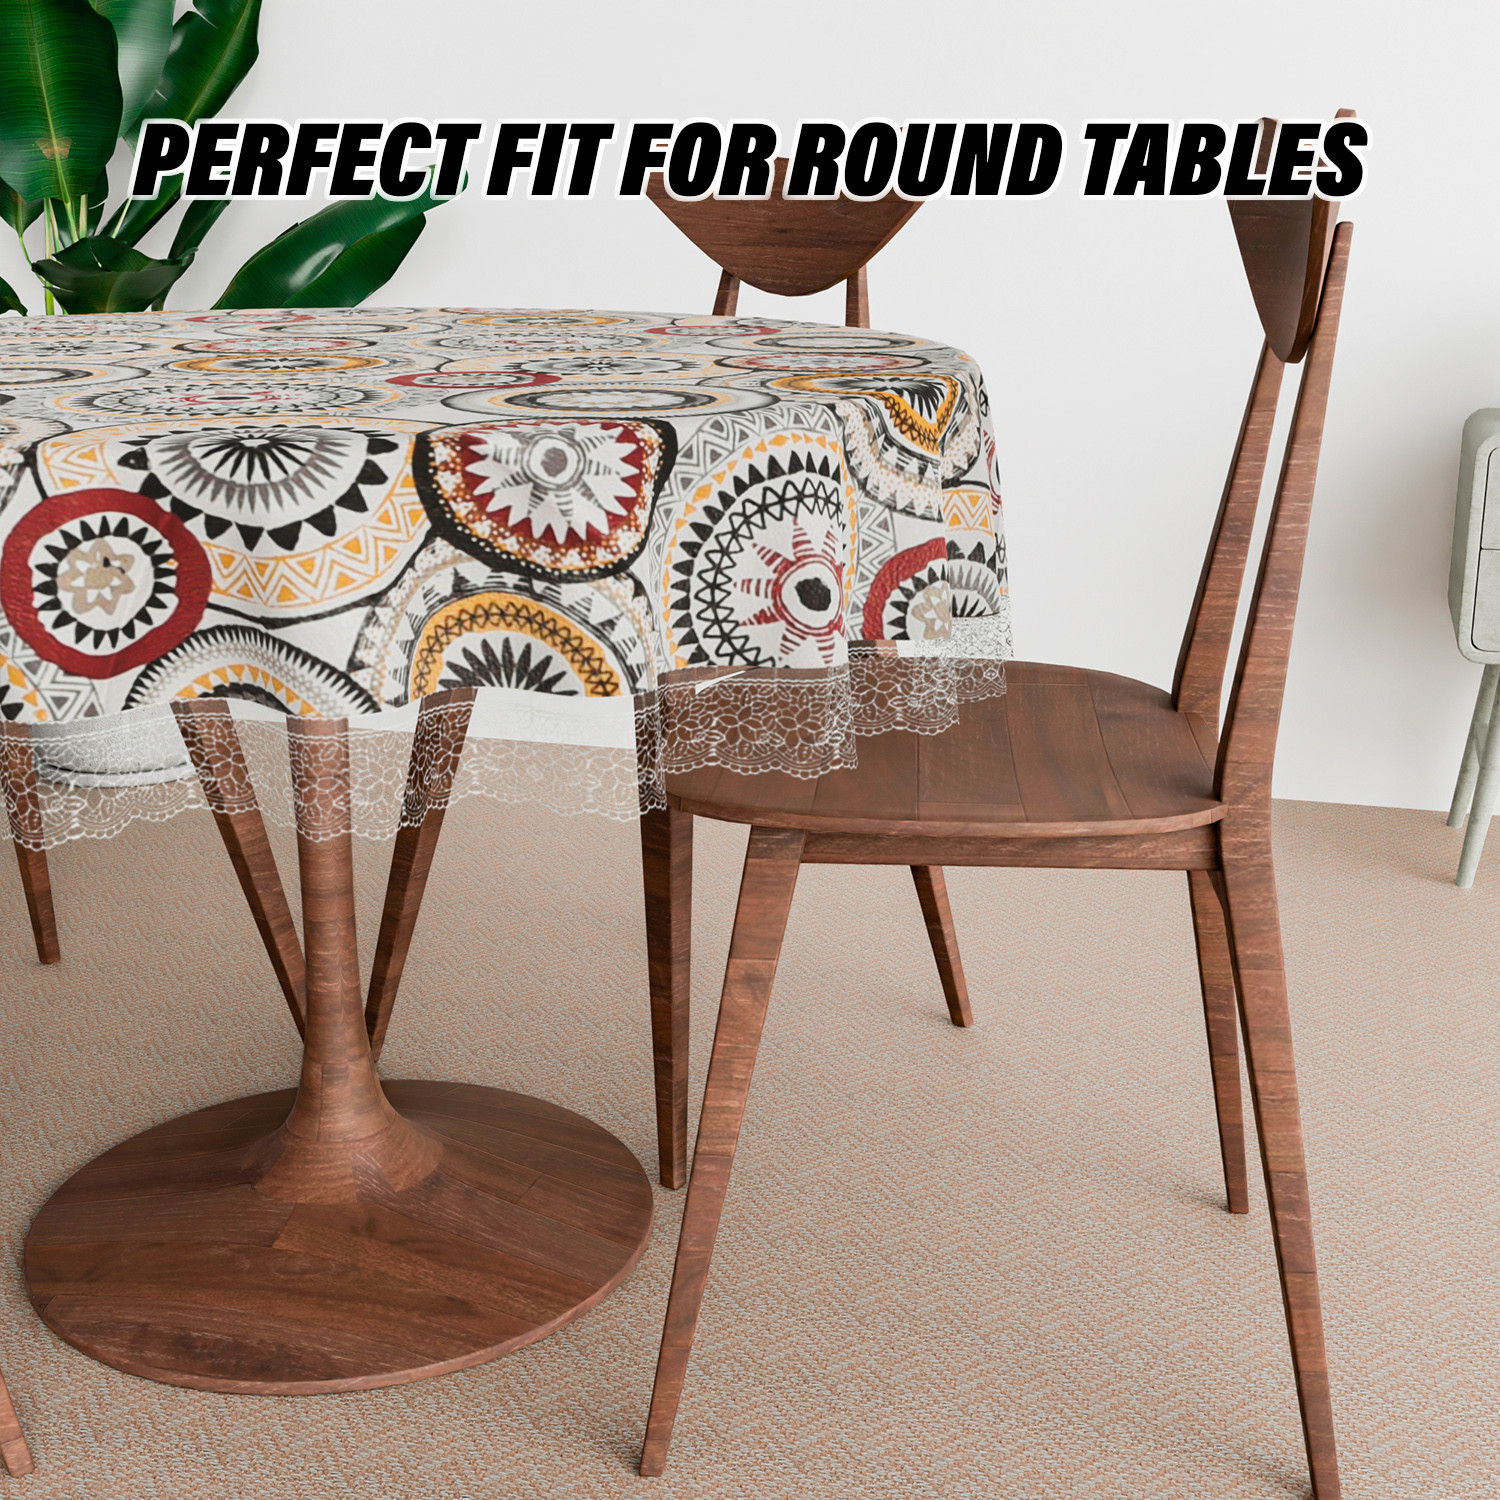 Kuber Industries Round Table Cover | PVC Table Cloth for Round Tables | 4 Seater Round Table Cloth | Rangoli Kitchen Dining Tablecloth | Tabletop Cover | 60 Inch | White